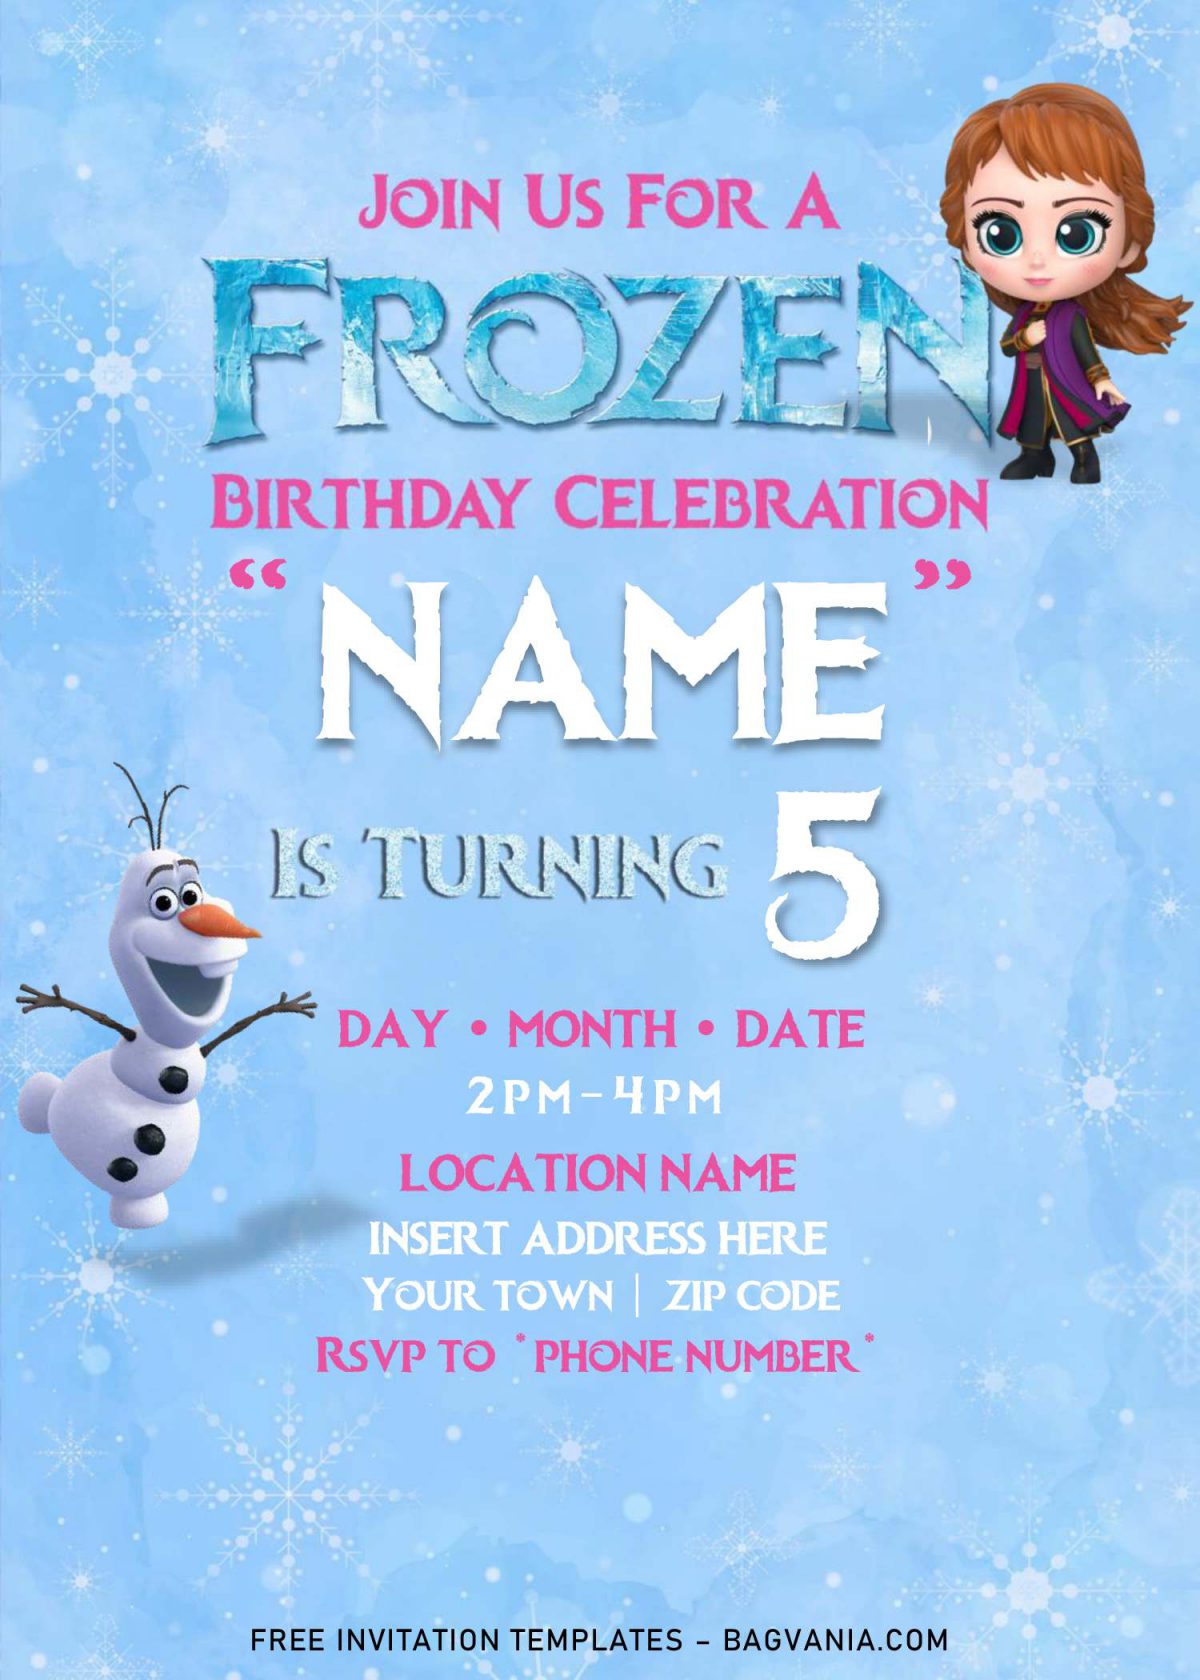 Free Frozen Birthday Invitation Templates For Word and has 